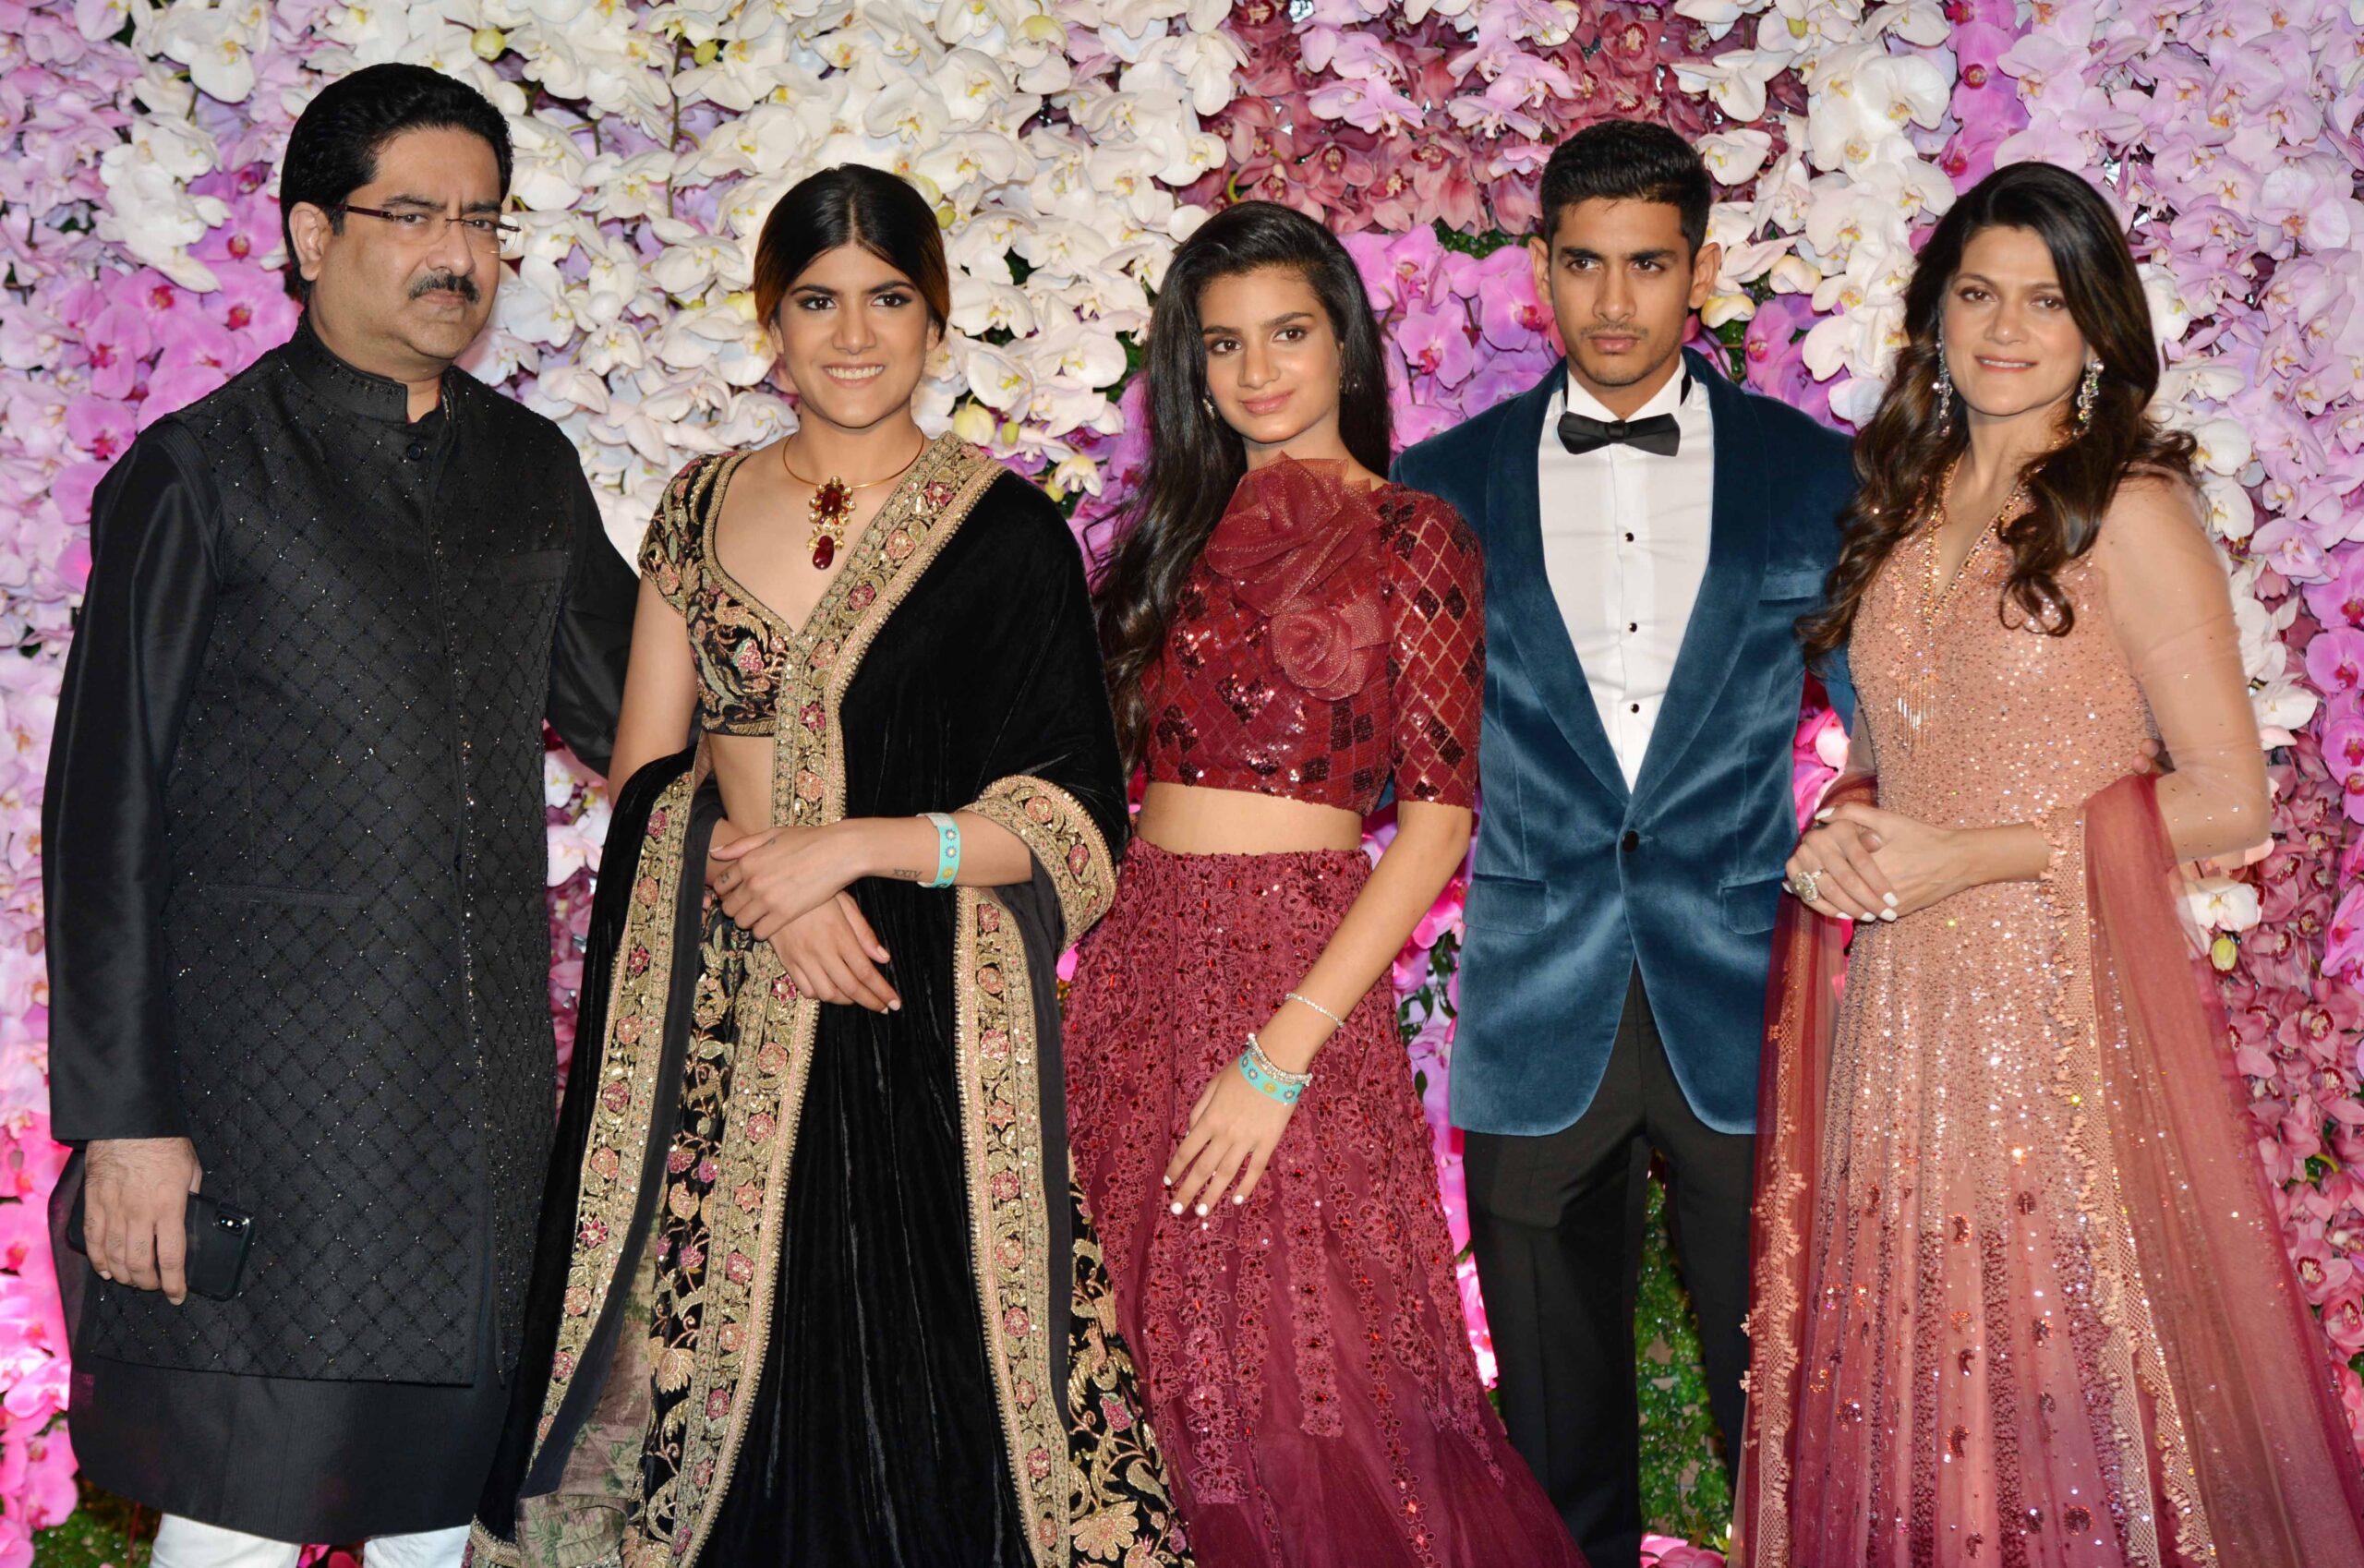 Billionaire Indian Wedding: All The Details - Betches